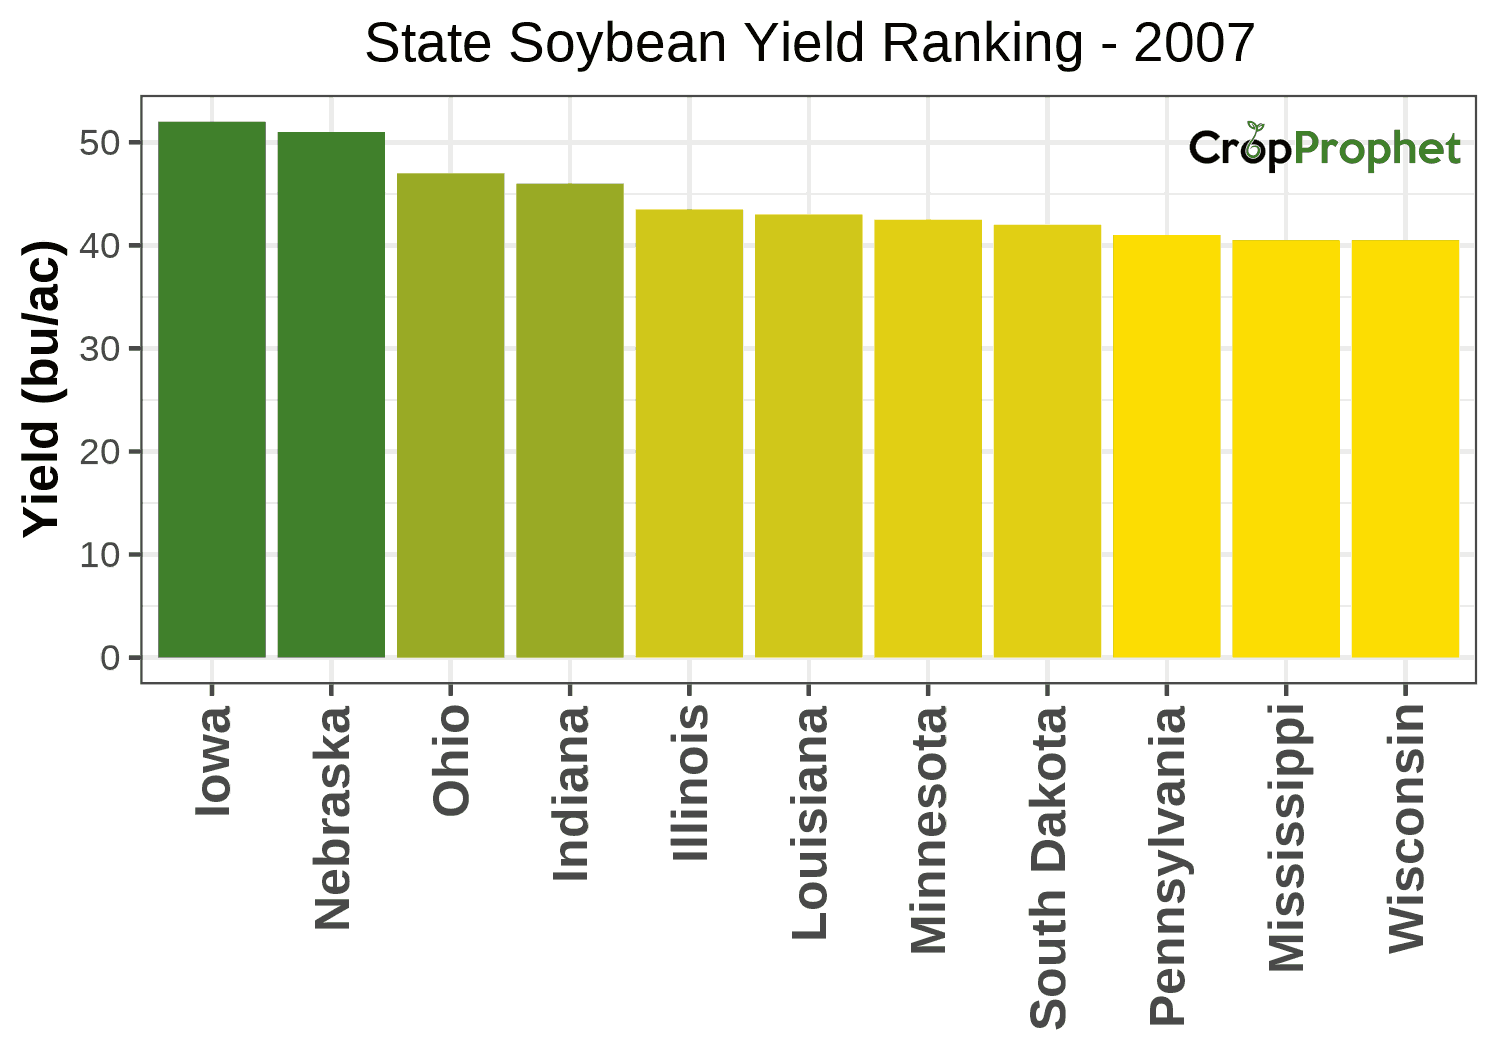 Soybean Production by State - 2007 Rankings